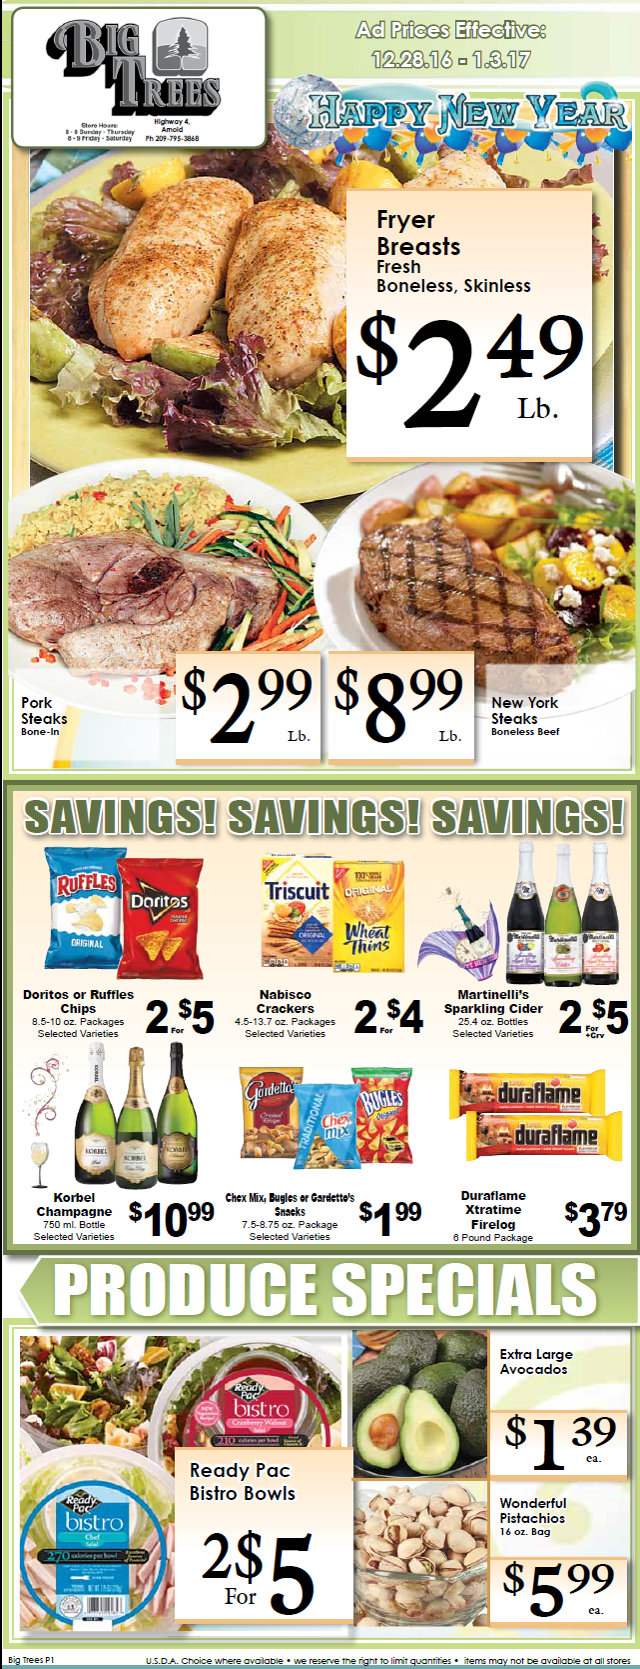 Big Trees Market Weekly Ad & Specials Through January 3, 2017